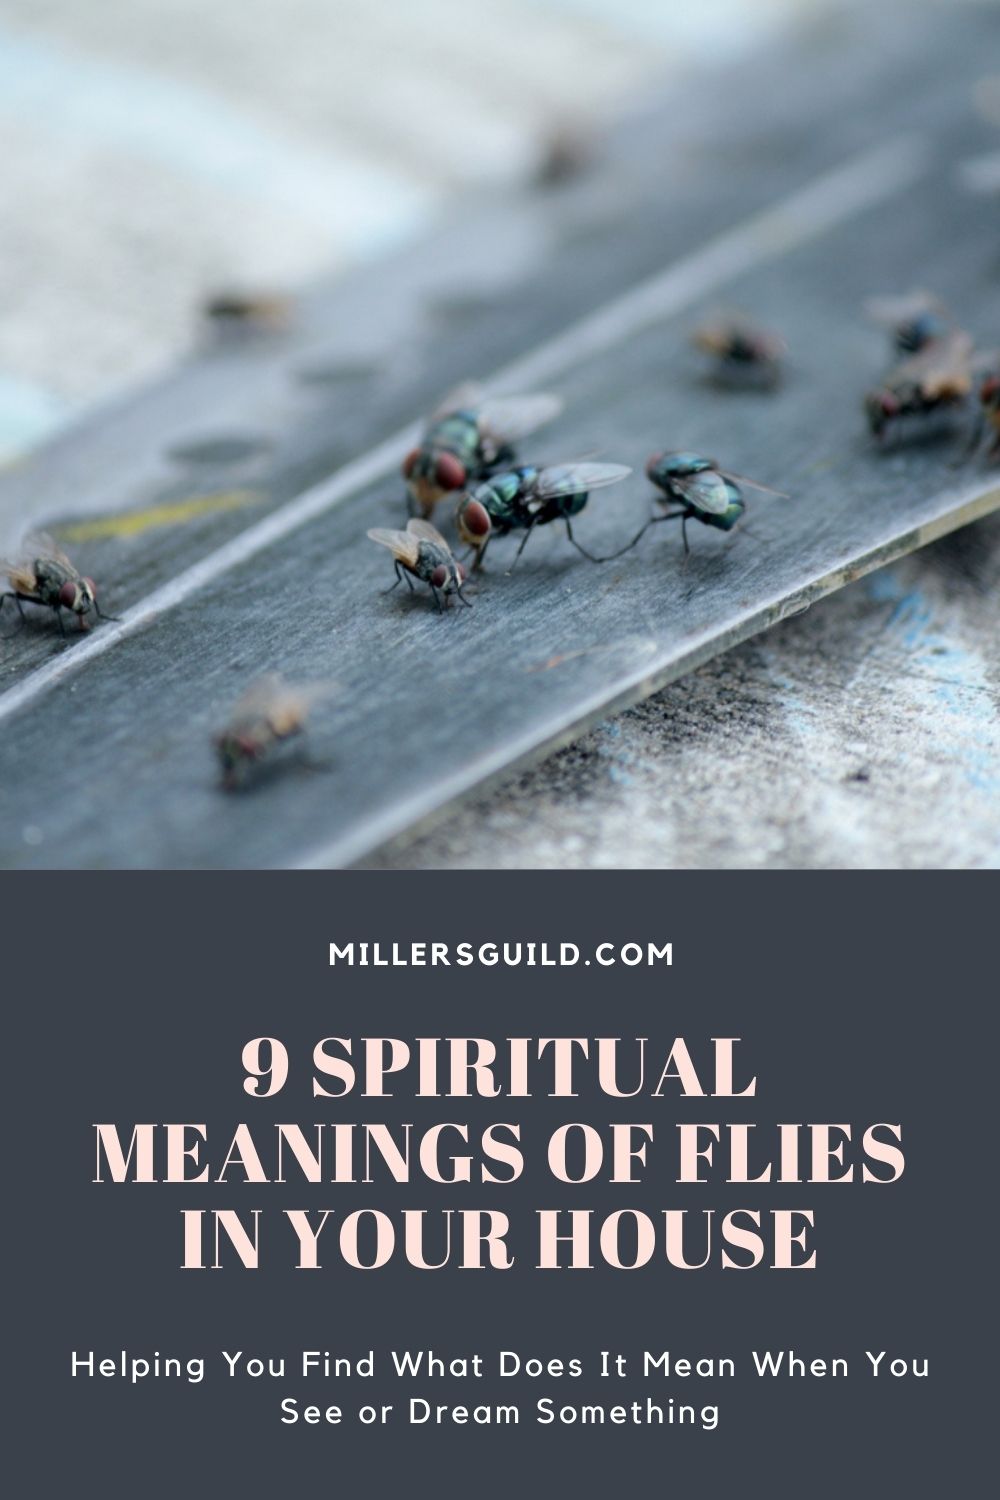 9 Spiritual Meanings of Flies In Your House 2